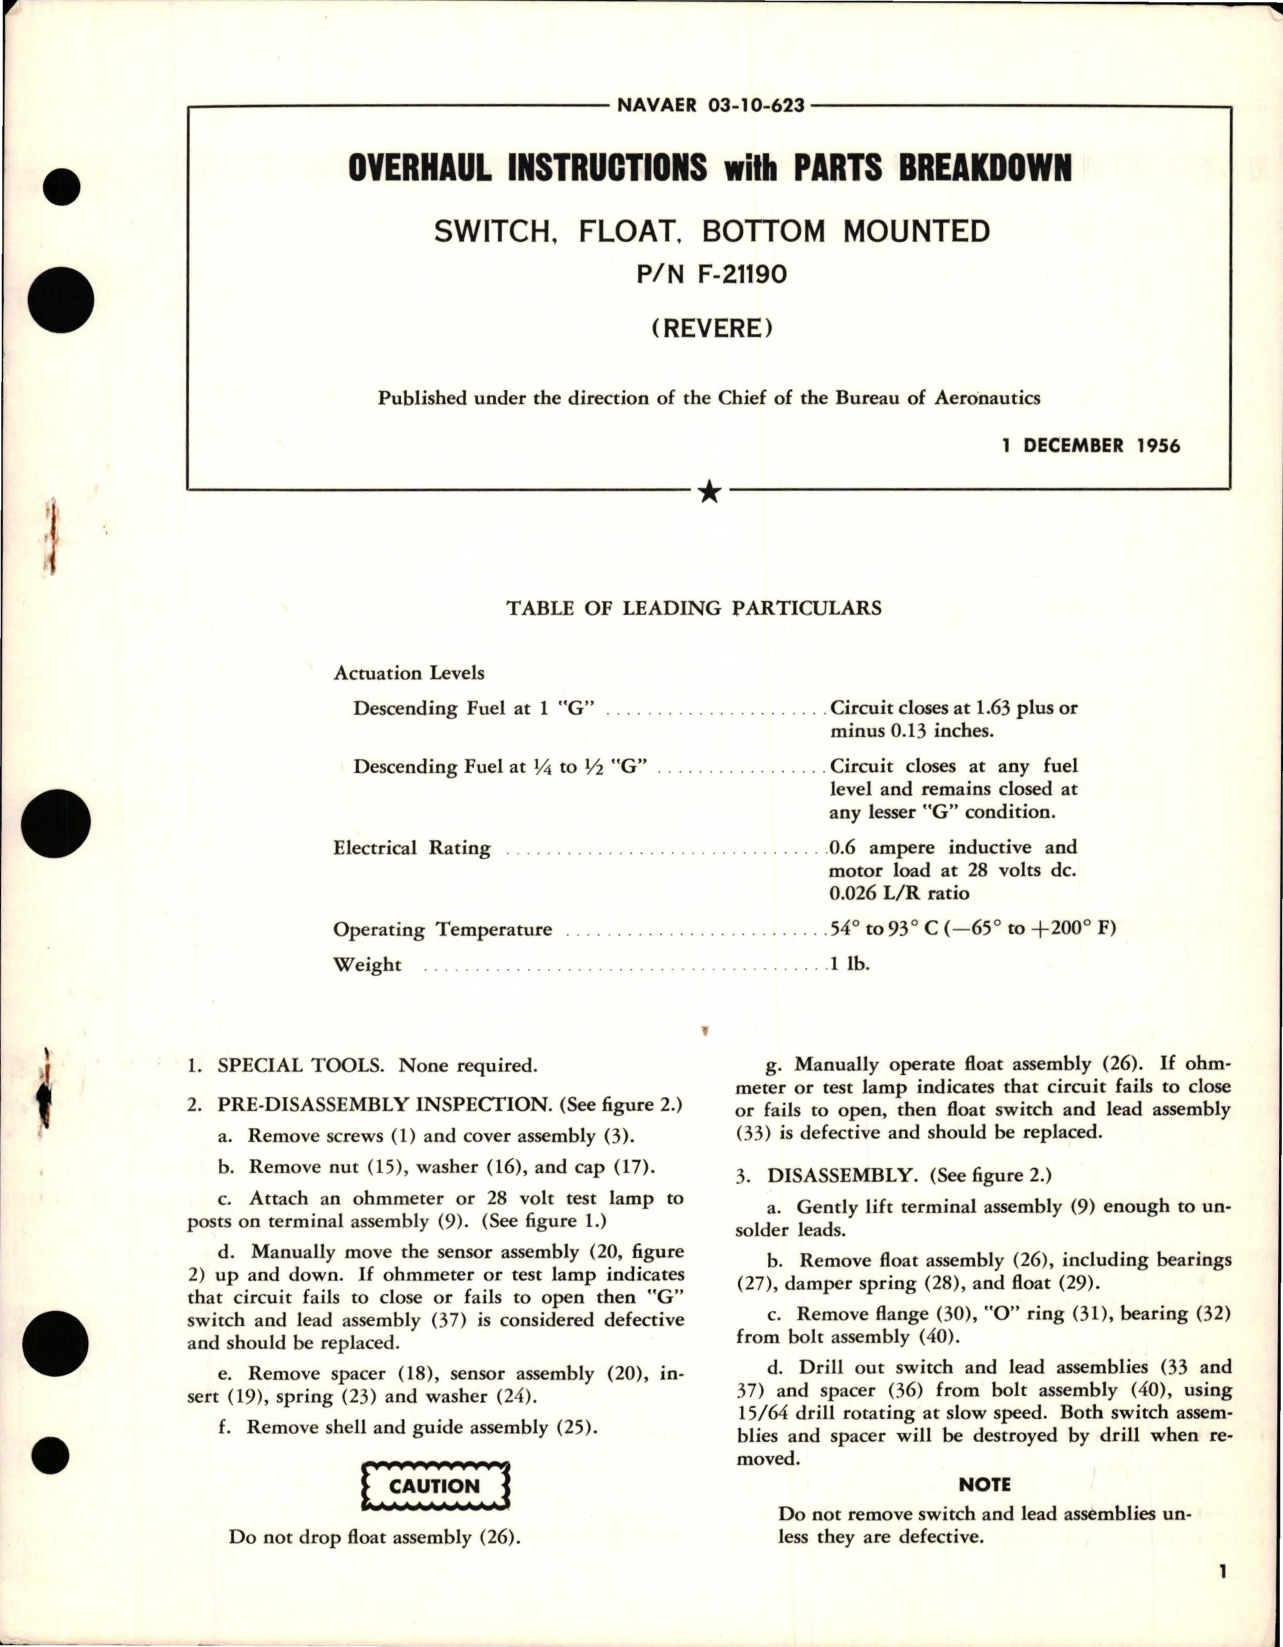 Sample page 1 from AirCorps Library document: Overhaul Instructions with Parts Breakdown for Bottom Mounted Float Switch - F-21190